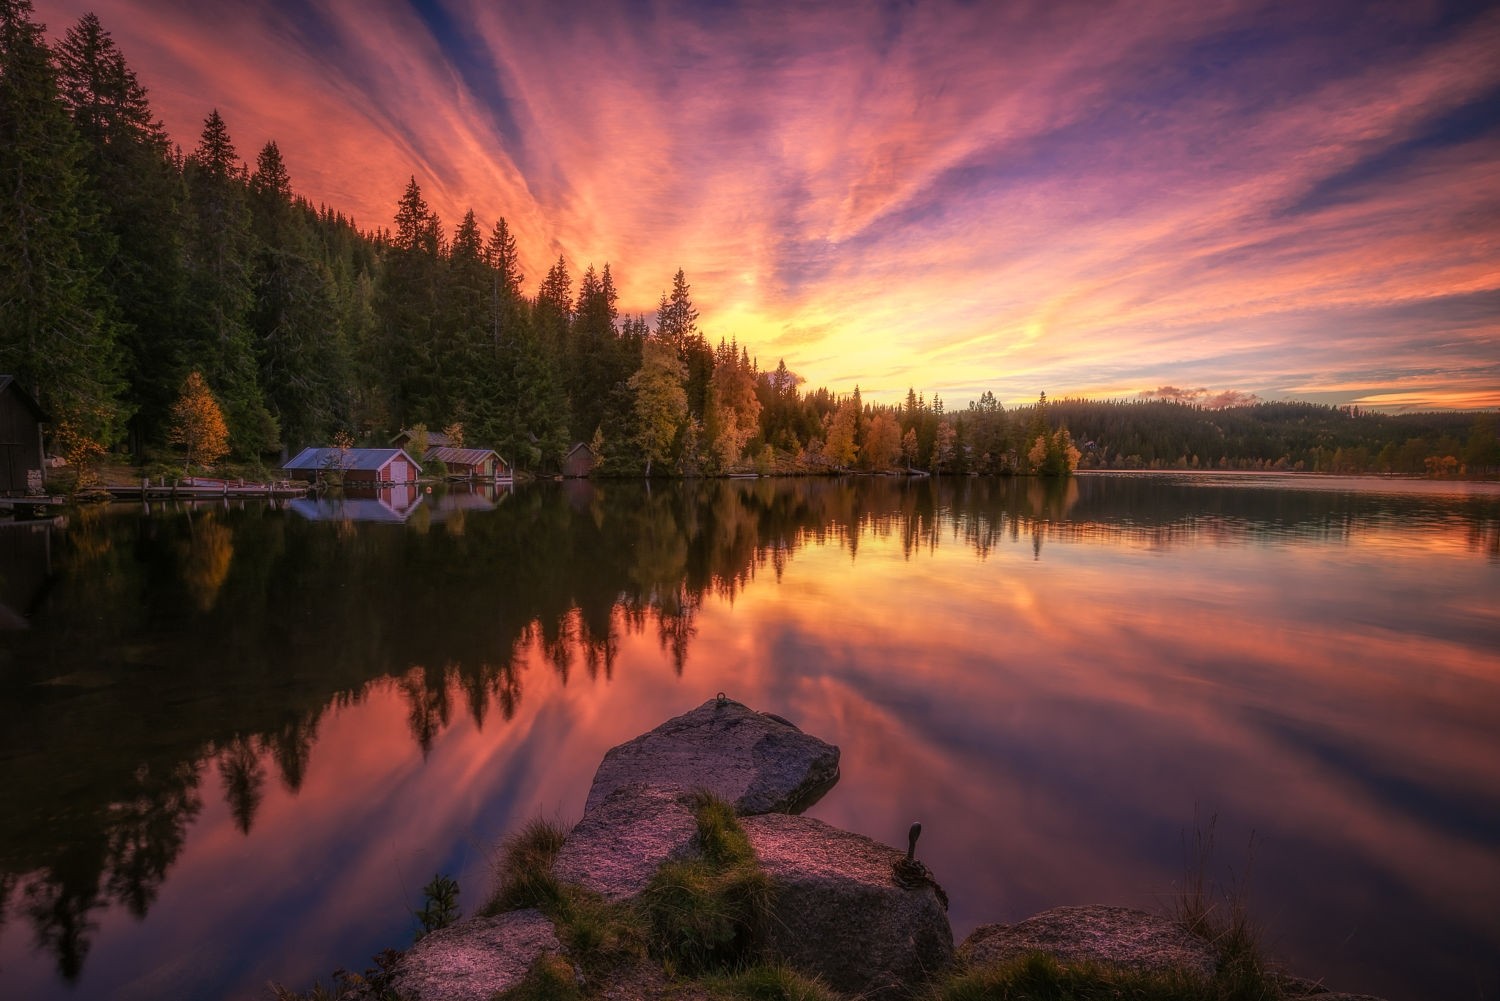 photography, Nature, Landscape, Lake, Sunset, Boathouses, Forest, Sky, Calm waters, Reflection ...